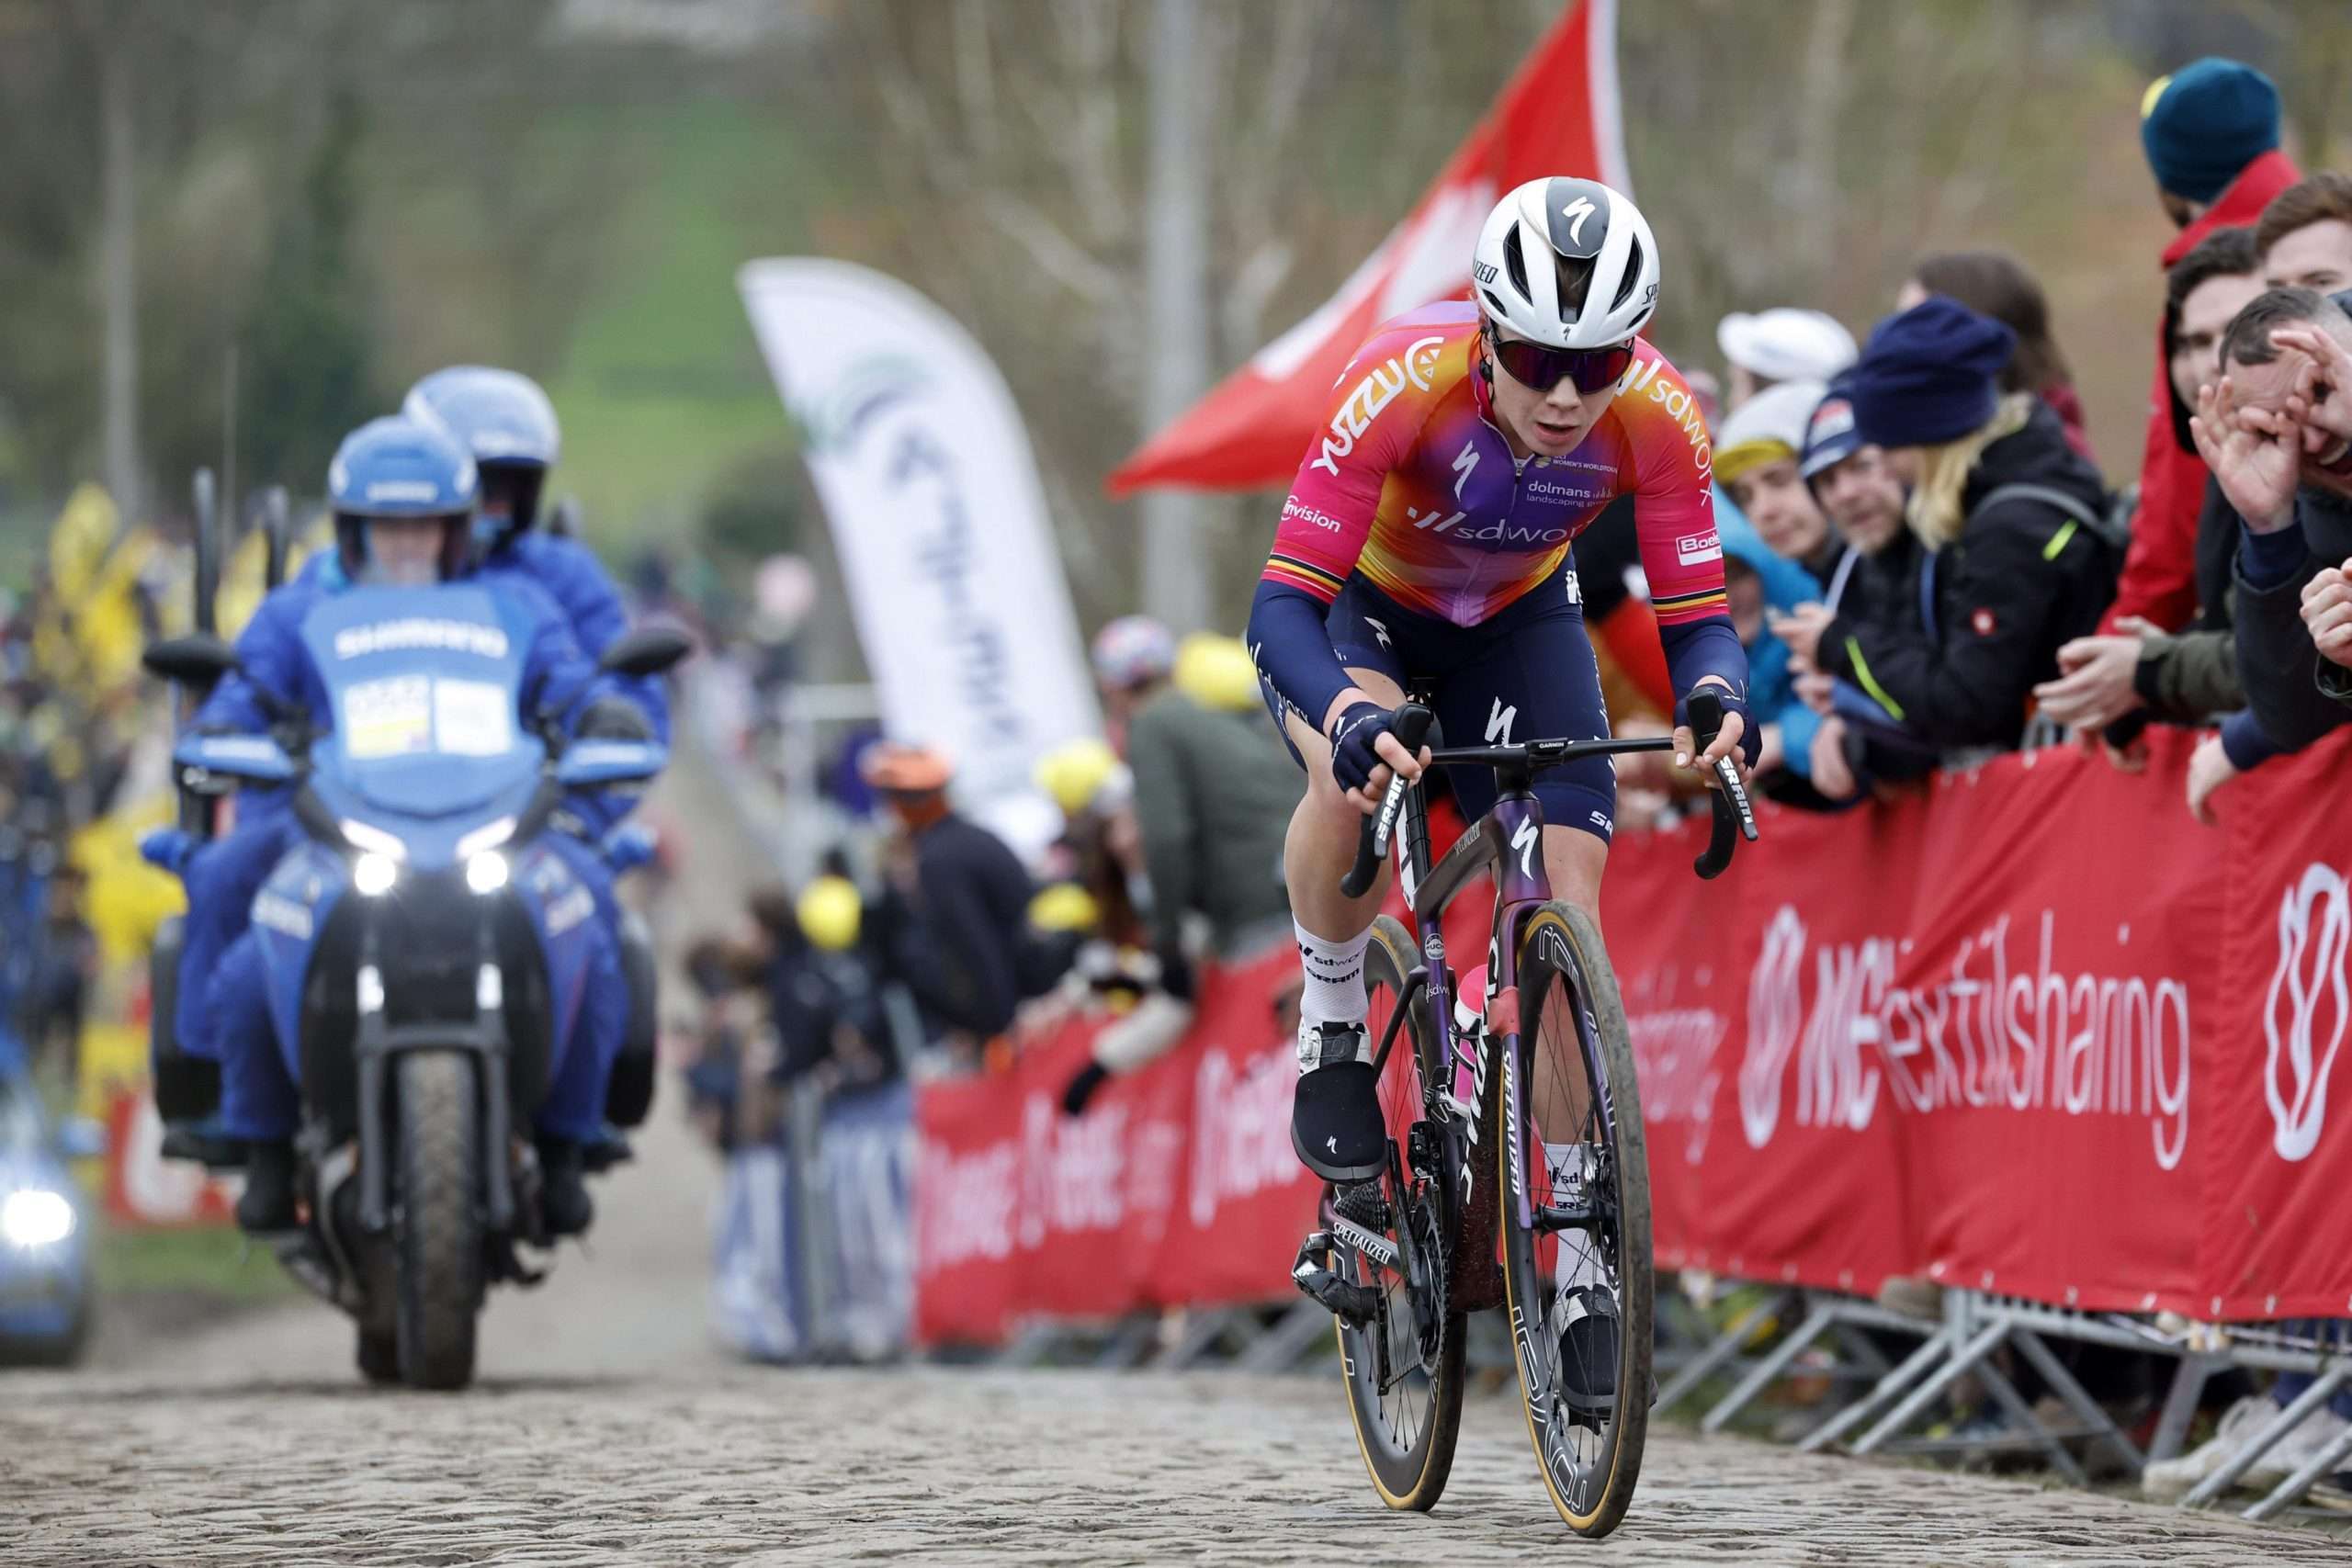 SD Worx's Lotte Kopecky accelerates on the Oude Kwaremont climb en route to a solo victory at the 2023 Women's Tour of Flanders.